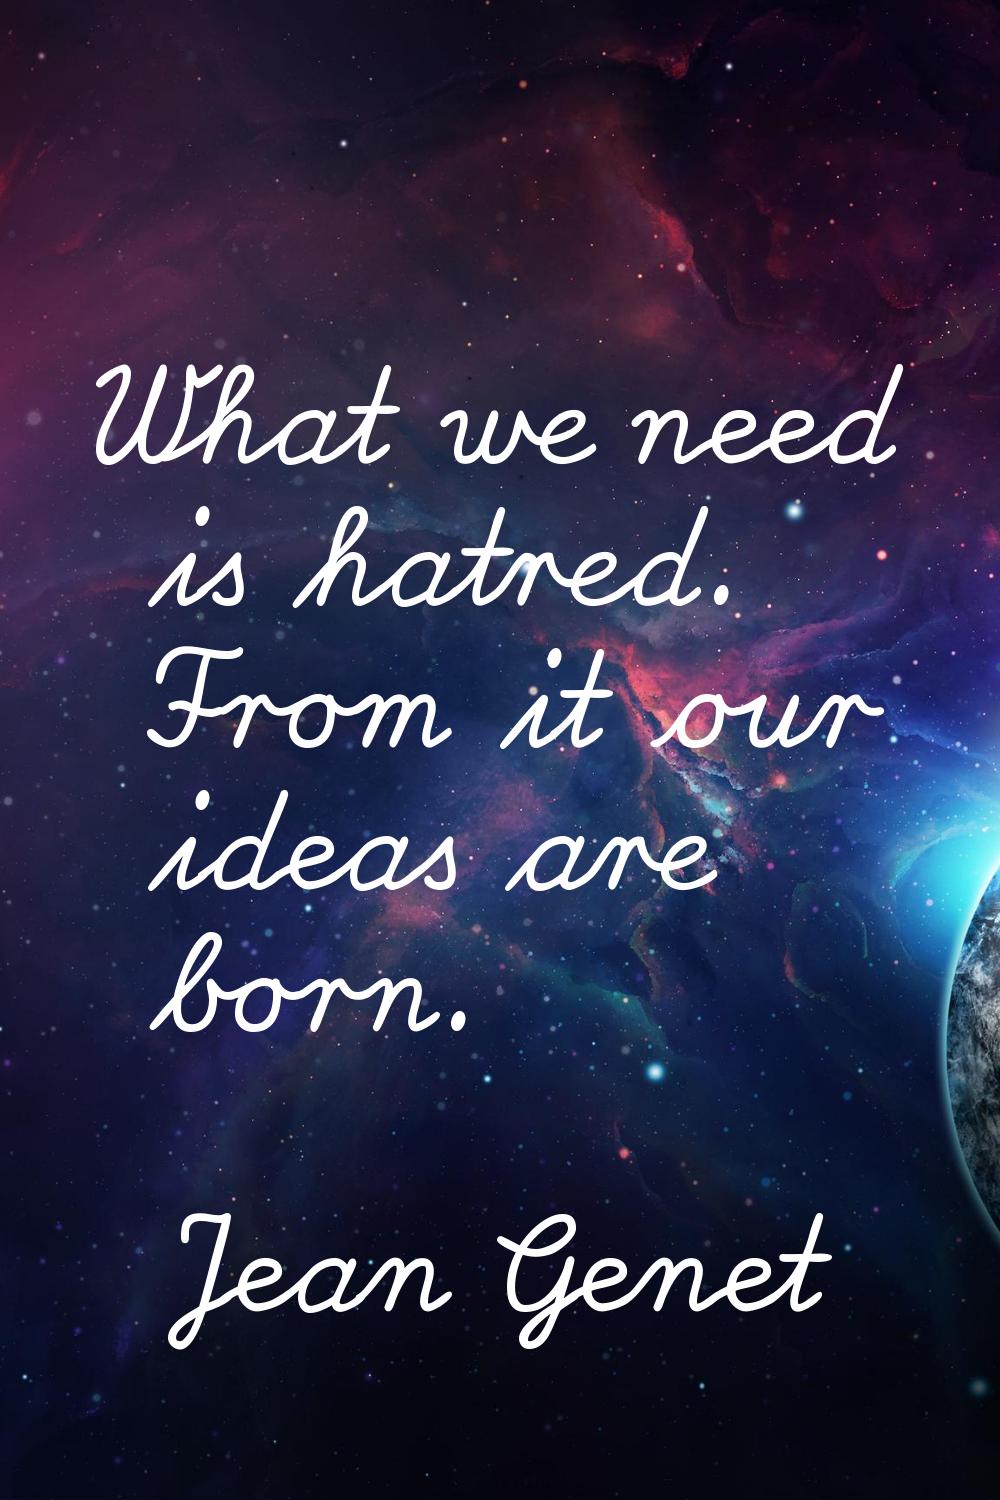 What we need is hatred. From it our ideas are born.